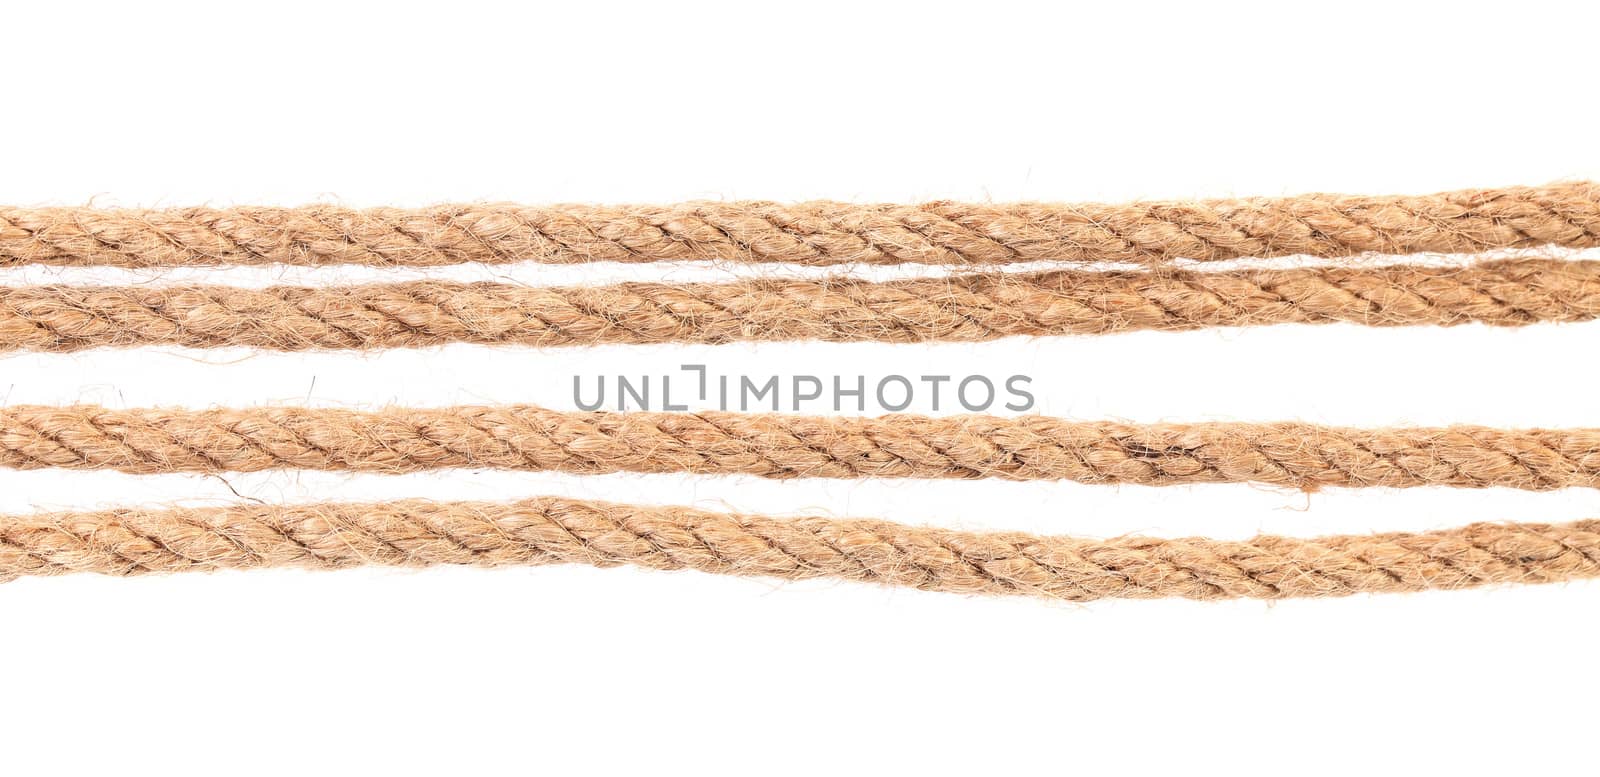 Four parallel ropes. Isolated on a white background.